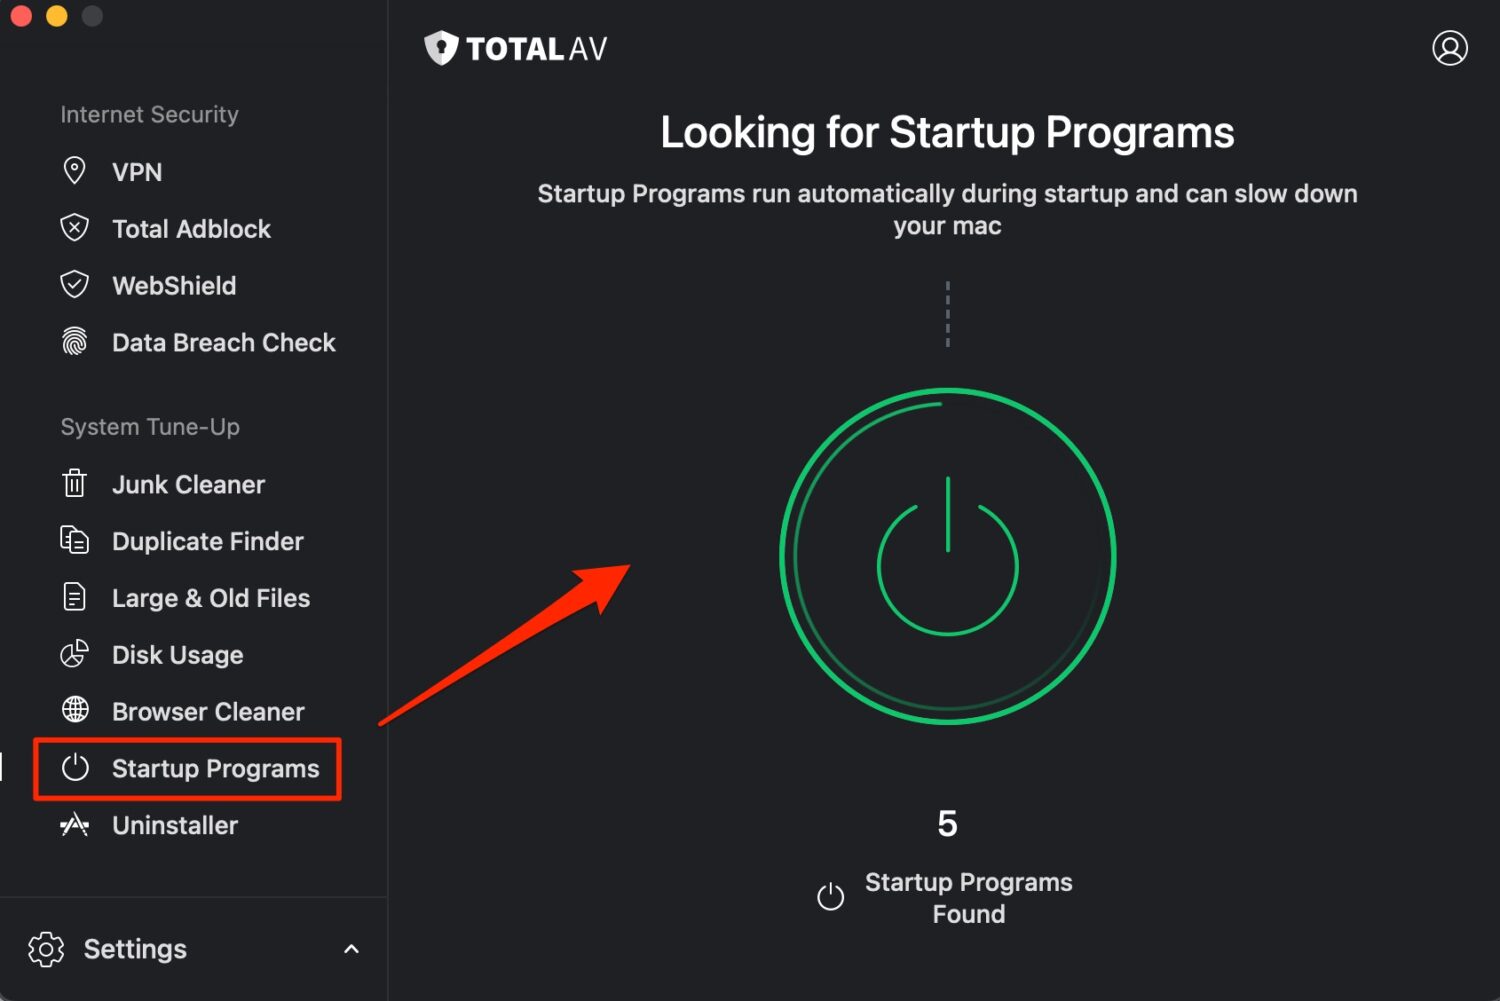 TotalAV dashboard featuring Startup Programs